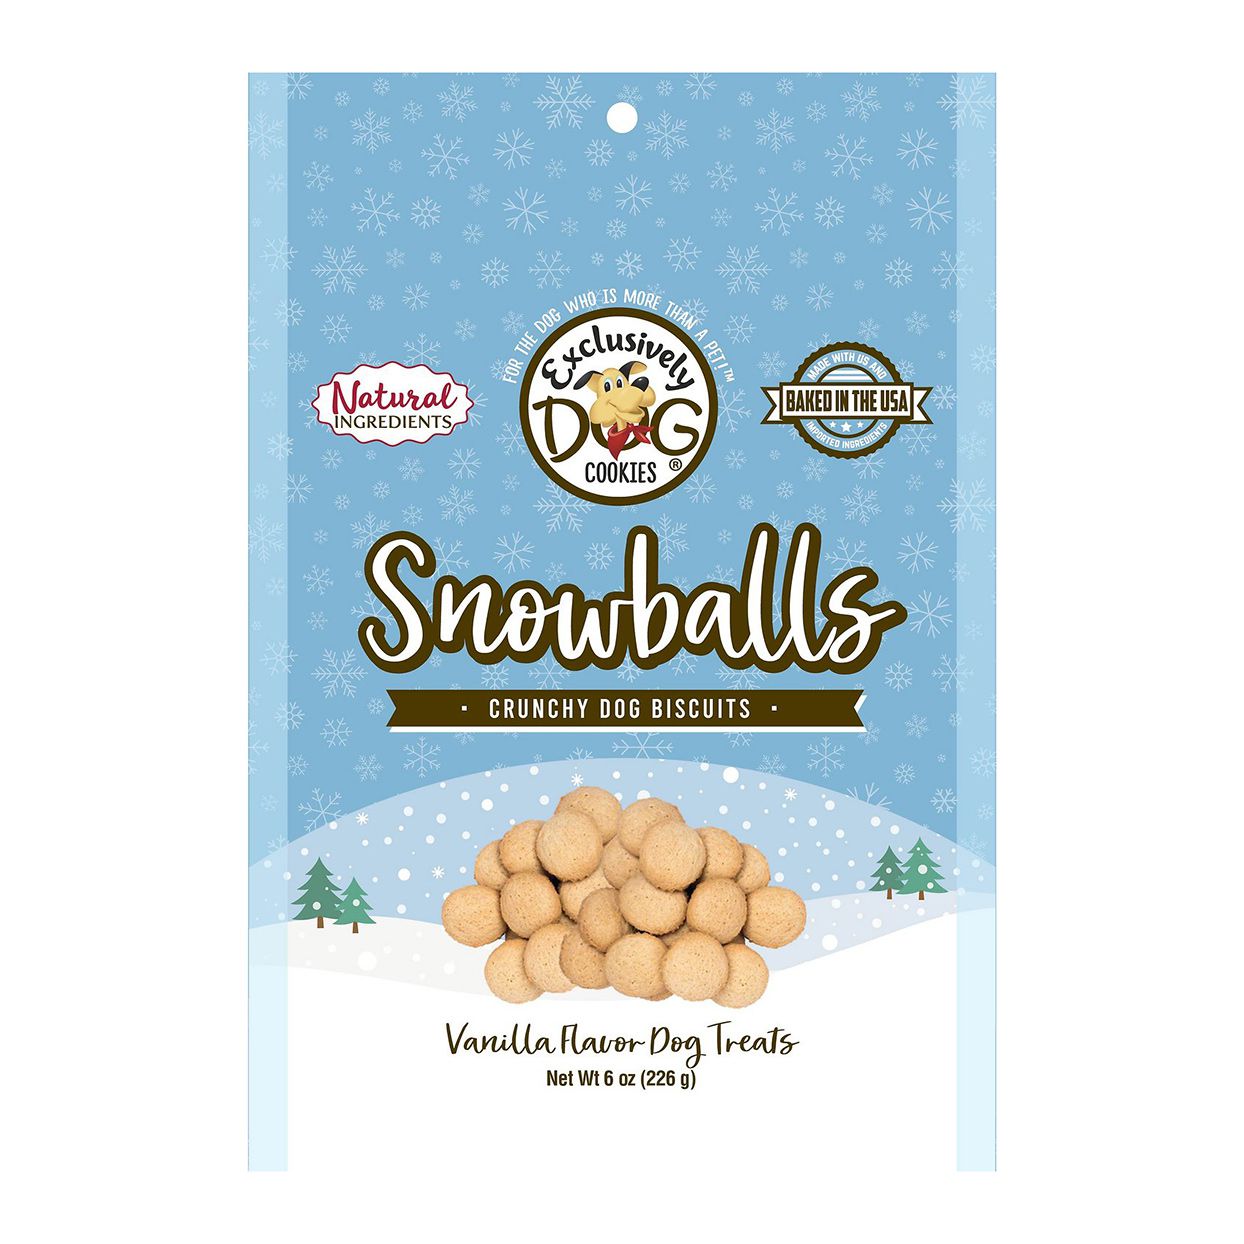 Product photo of Exclusively Dog Cookies Snowballs Vanilla Flavor Dog Treats